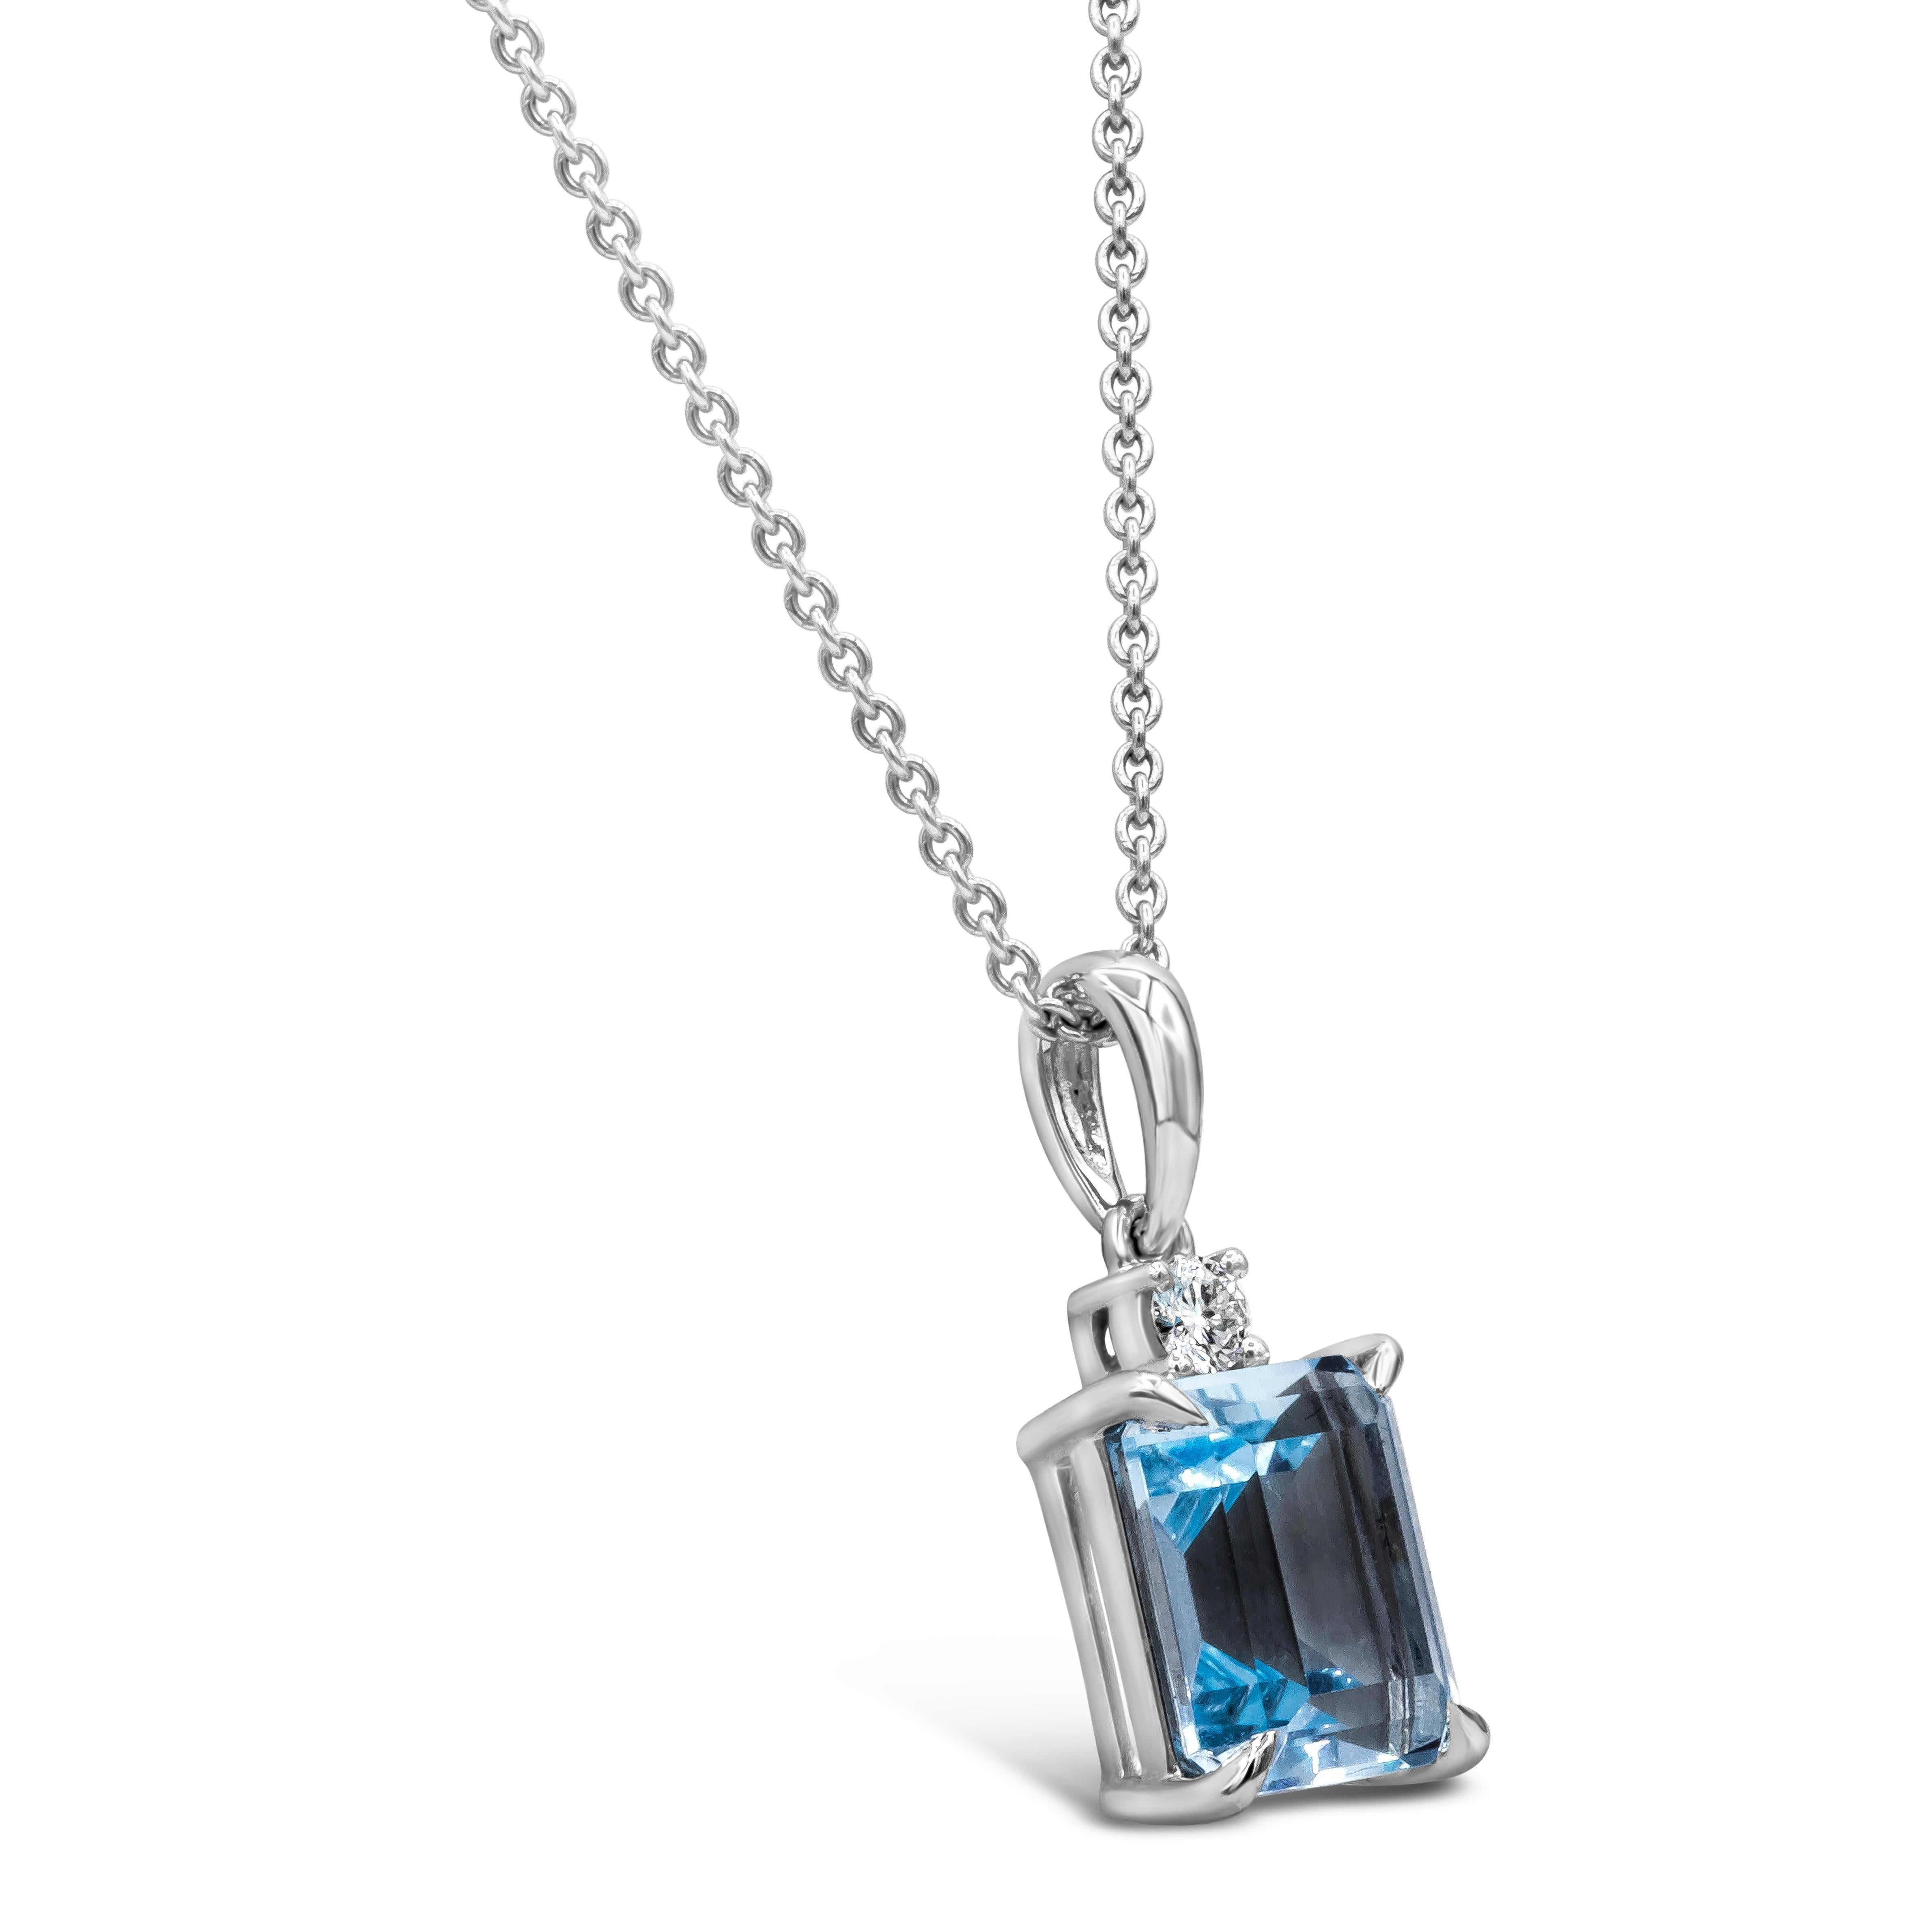 A simple solitaire pendant necklace showcasing a 3.09 carat emerald cut blue topaz, accented by a single round diamond. Made in 18 karat white gold. Suspended on a 16 inch chain (adjustable upon request).

